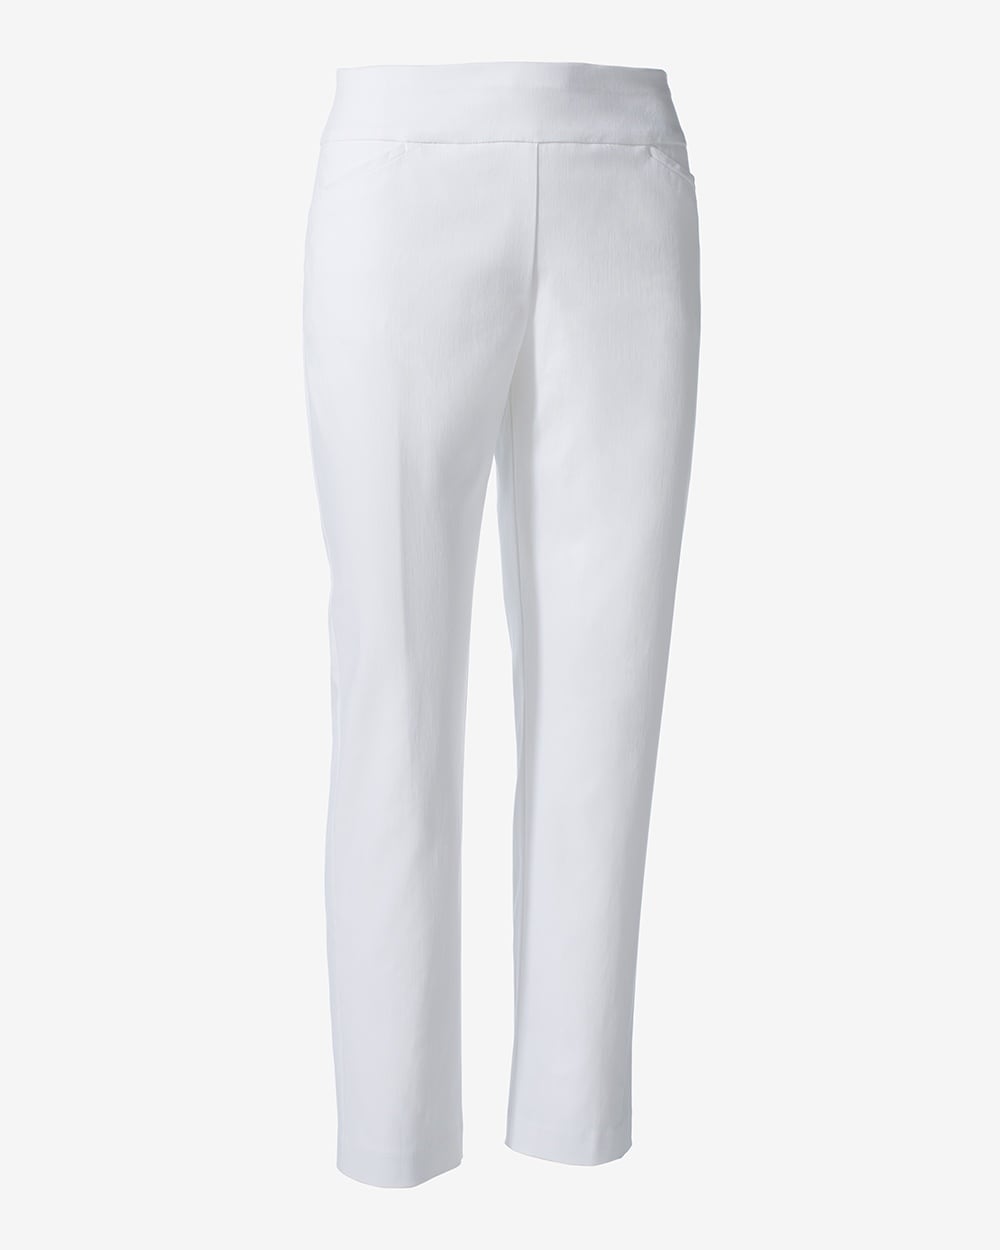 Perfect Stretch Fabulously Slimming Ankle Pants